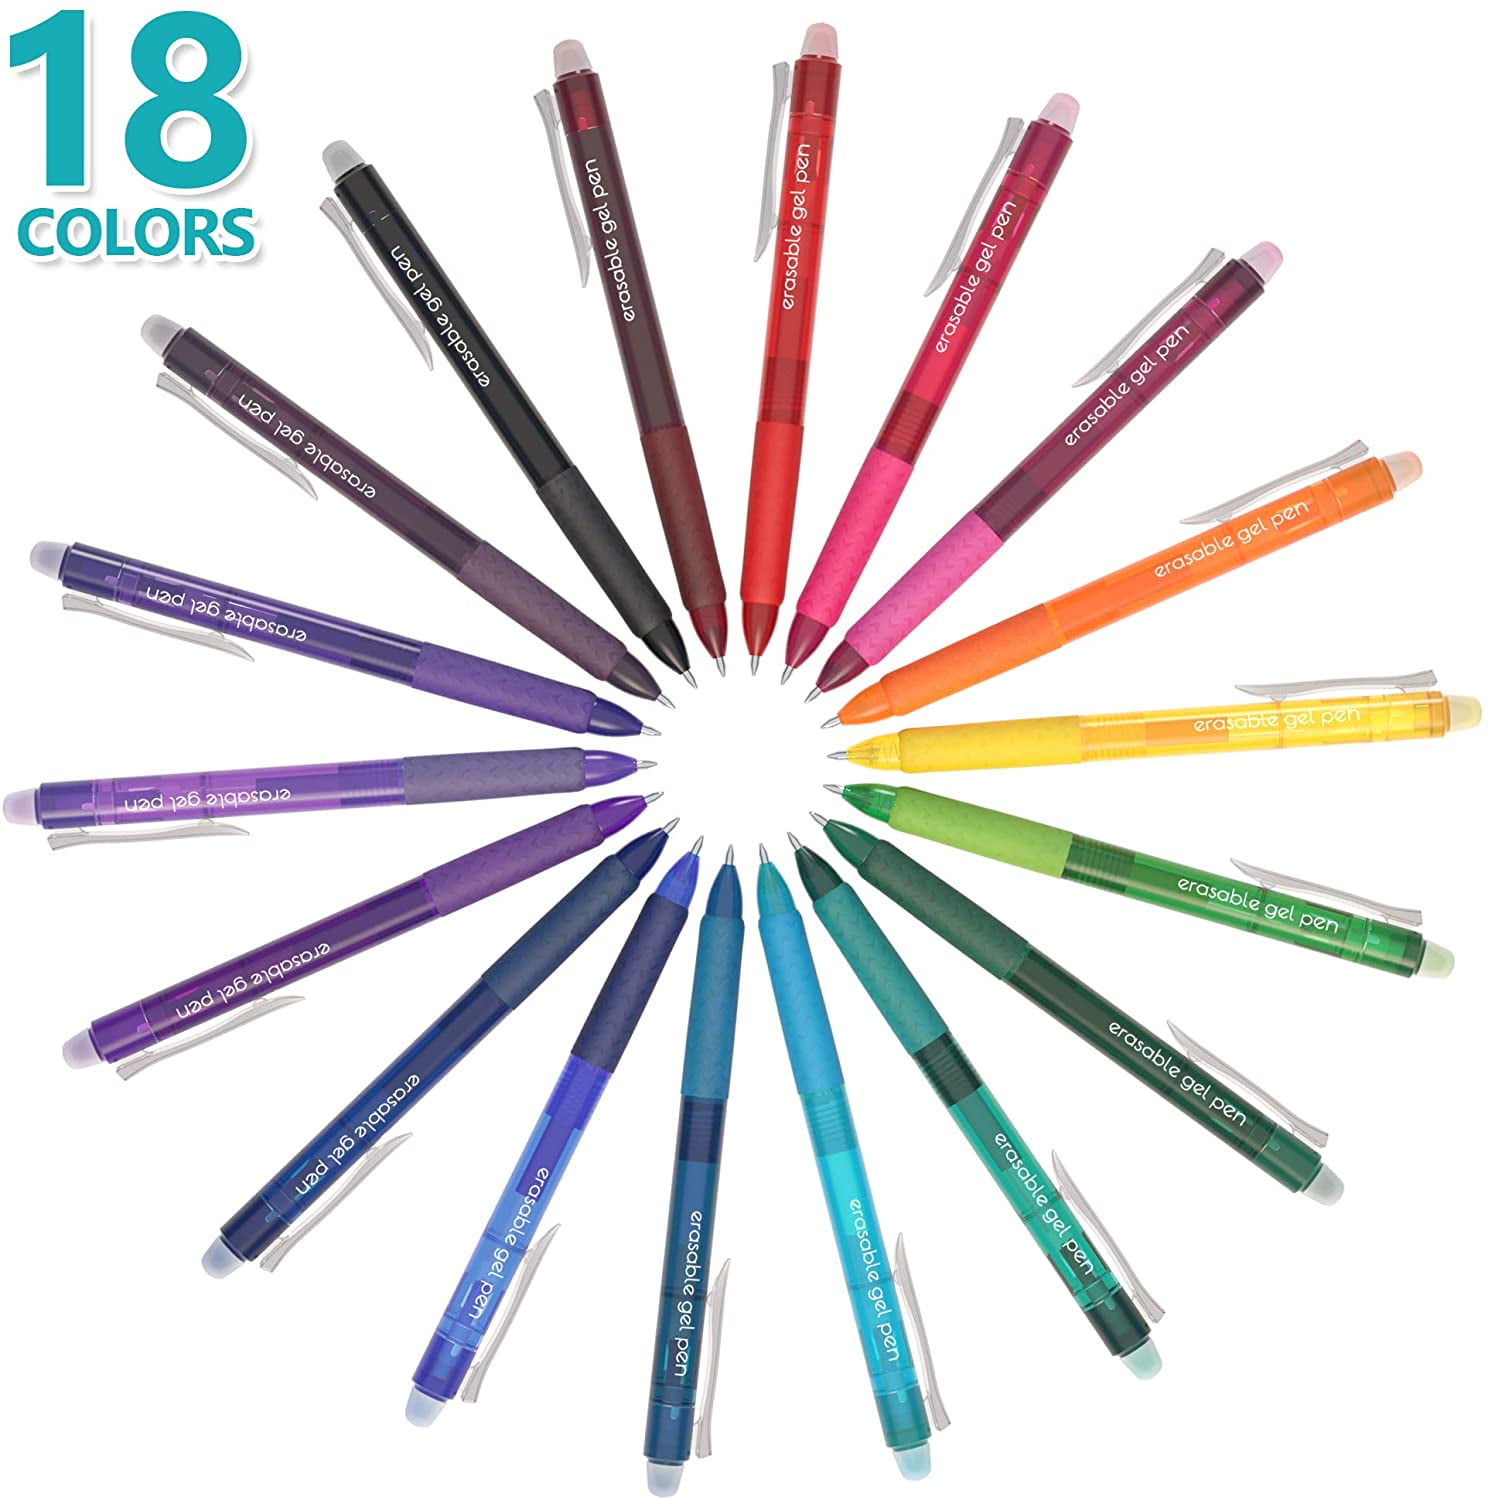 Lineon Erasable Gel Pens, 26 Colors Retractable Erasable Pens Clicker, Fine Point, Make Mistakes Disappear, Assorted Color Inks for Drawing Writing